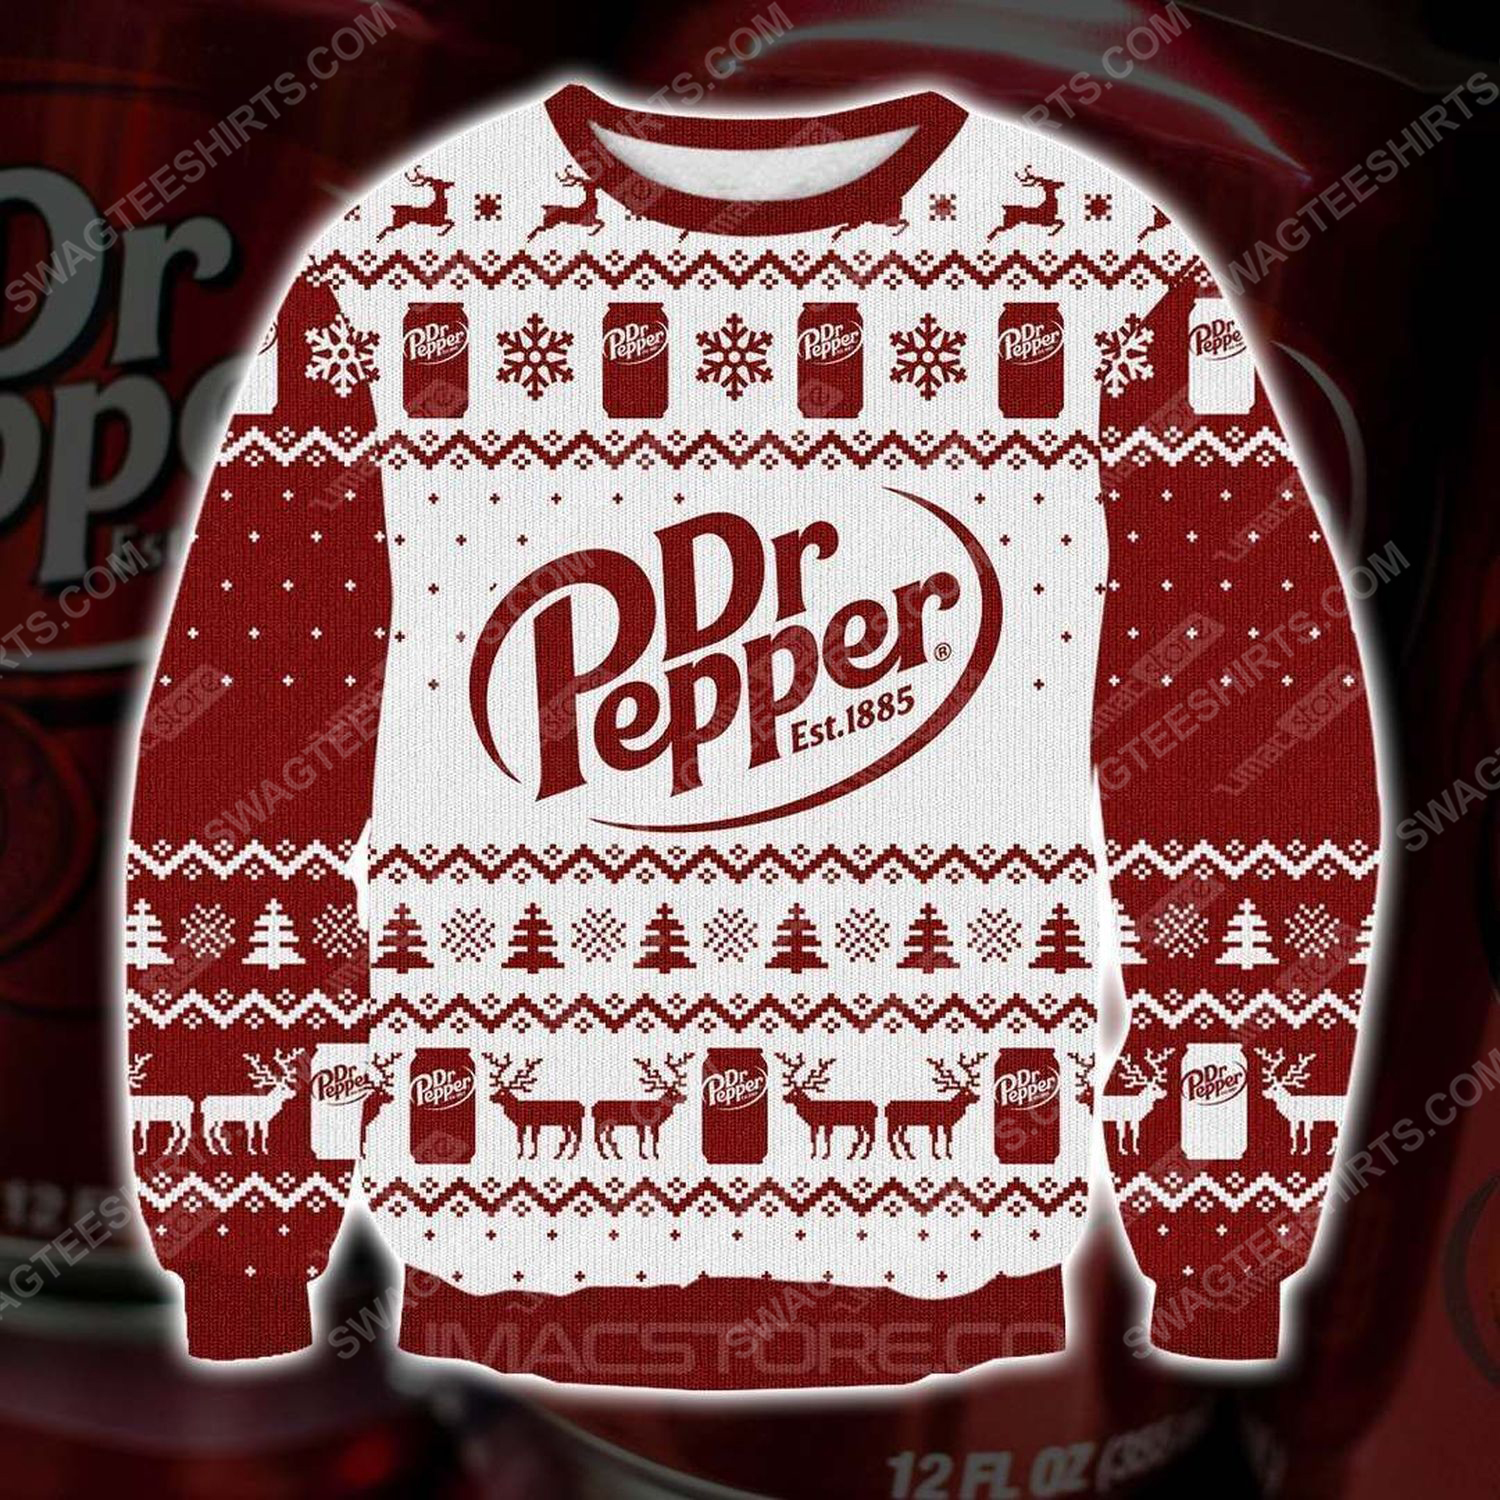 Dr pepper est 1885 ugly christmas sweater - Copy (2)